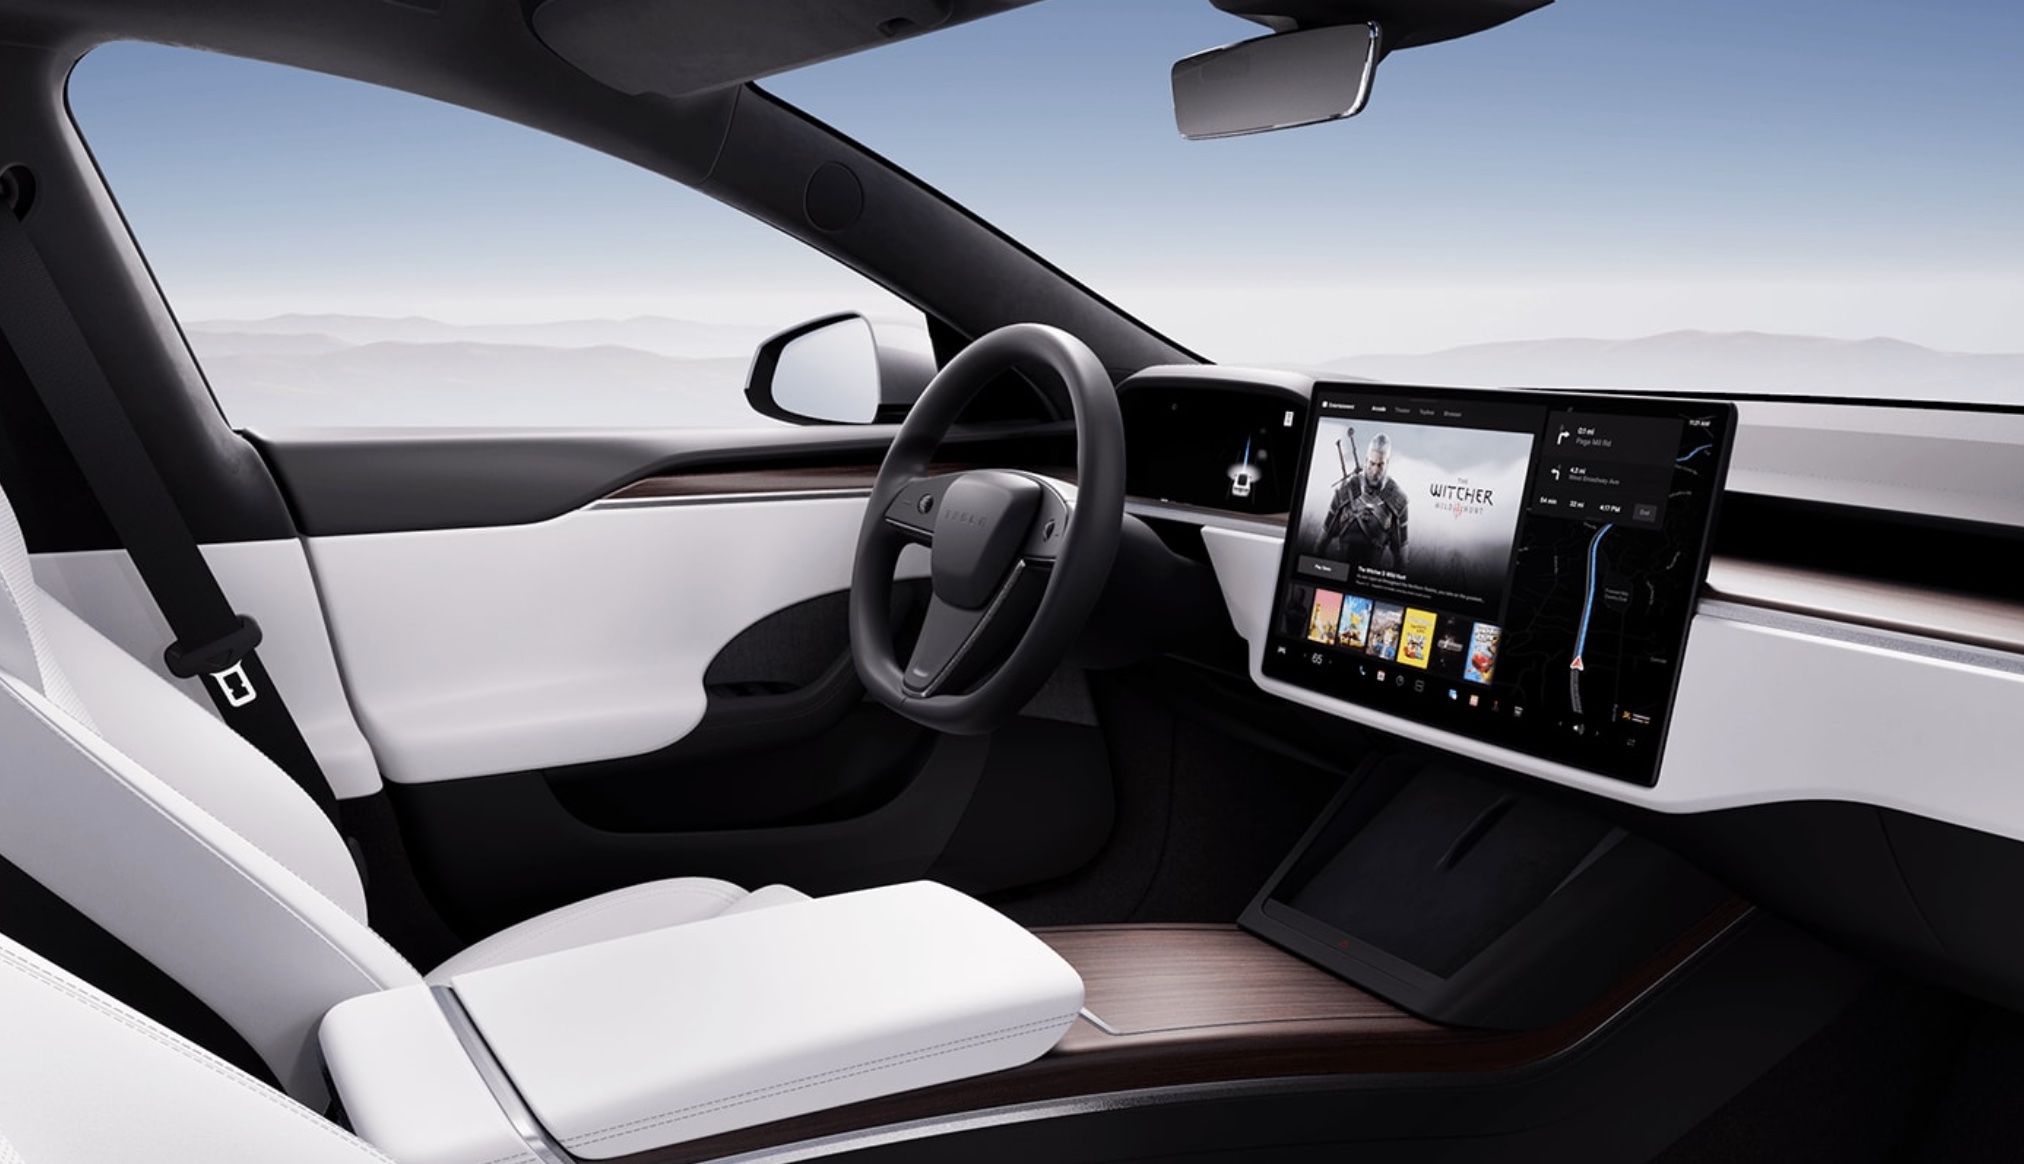 Tesla adds nifty climate control feature to complement phone calls